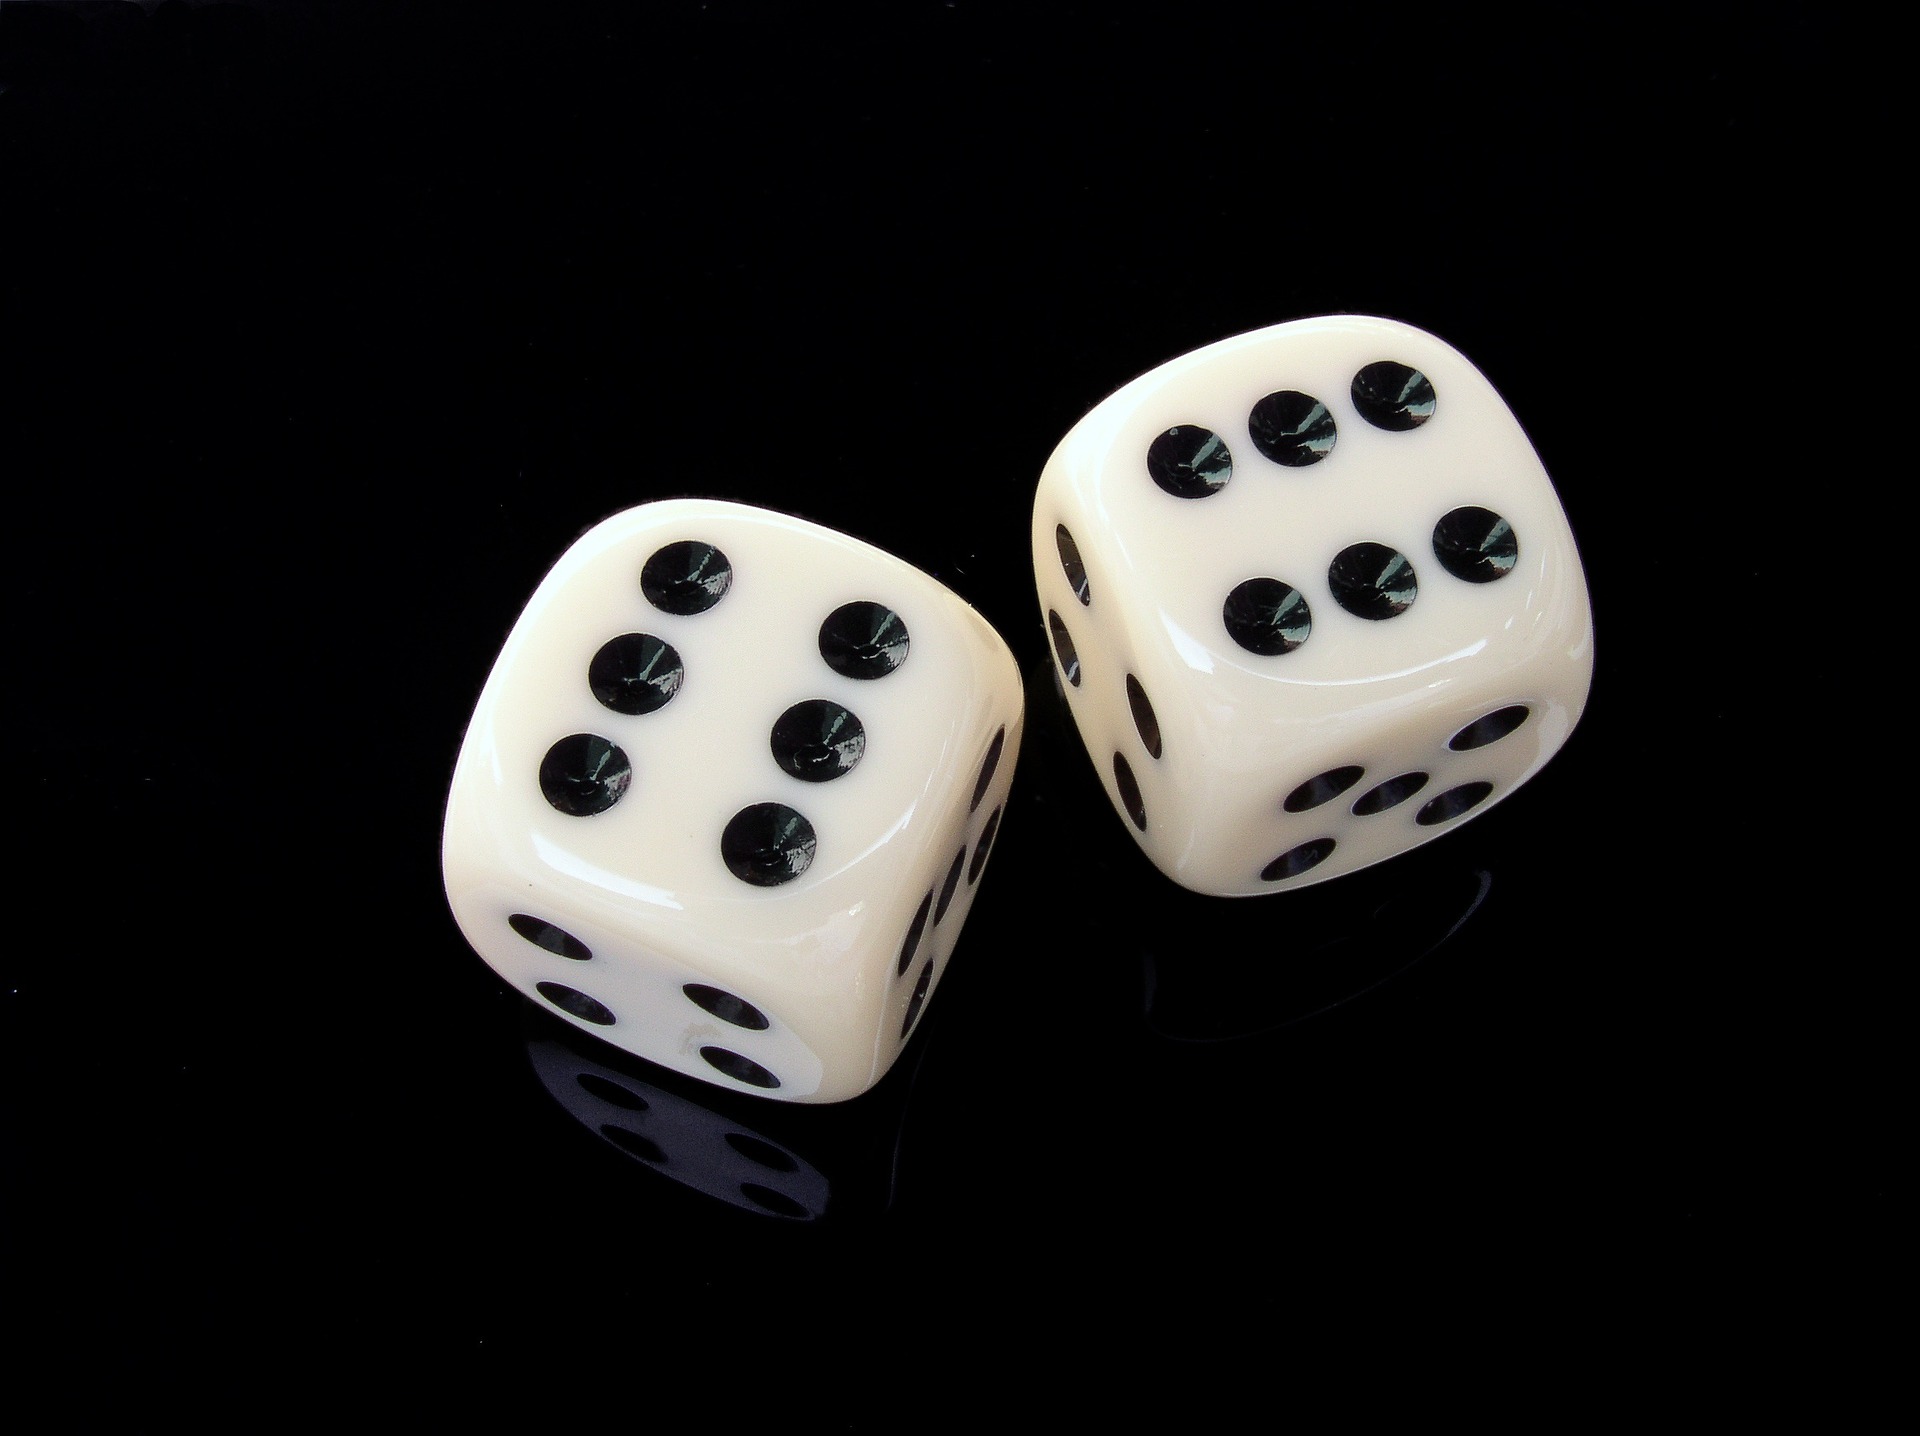 two dice on a black surface